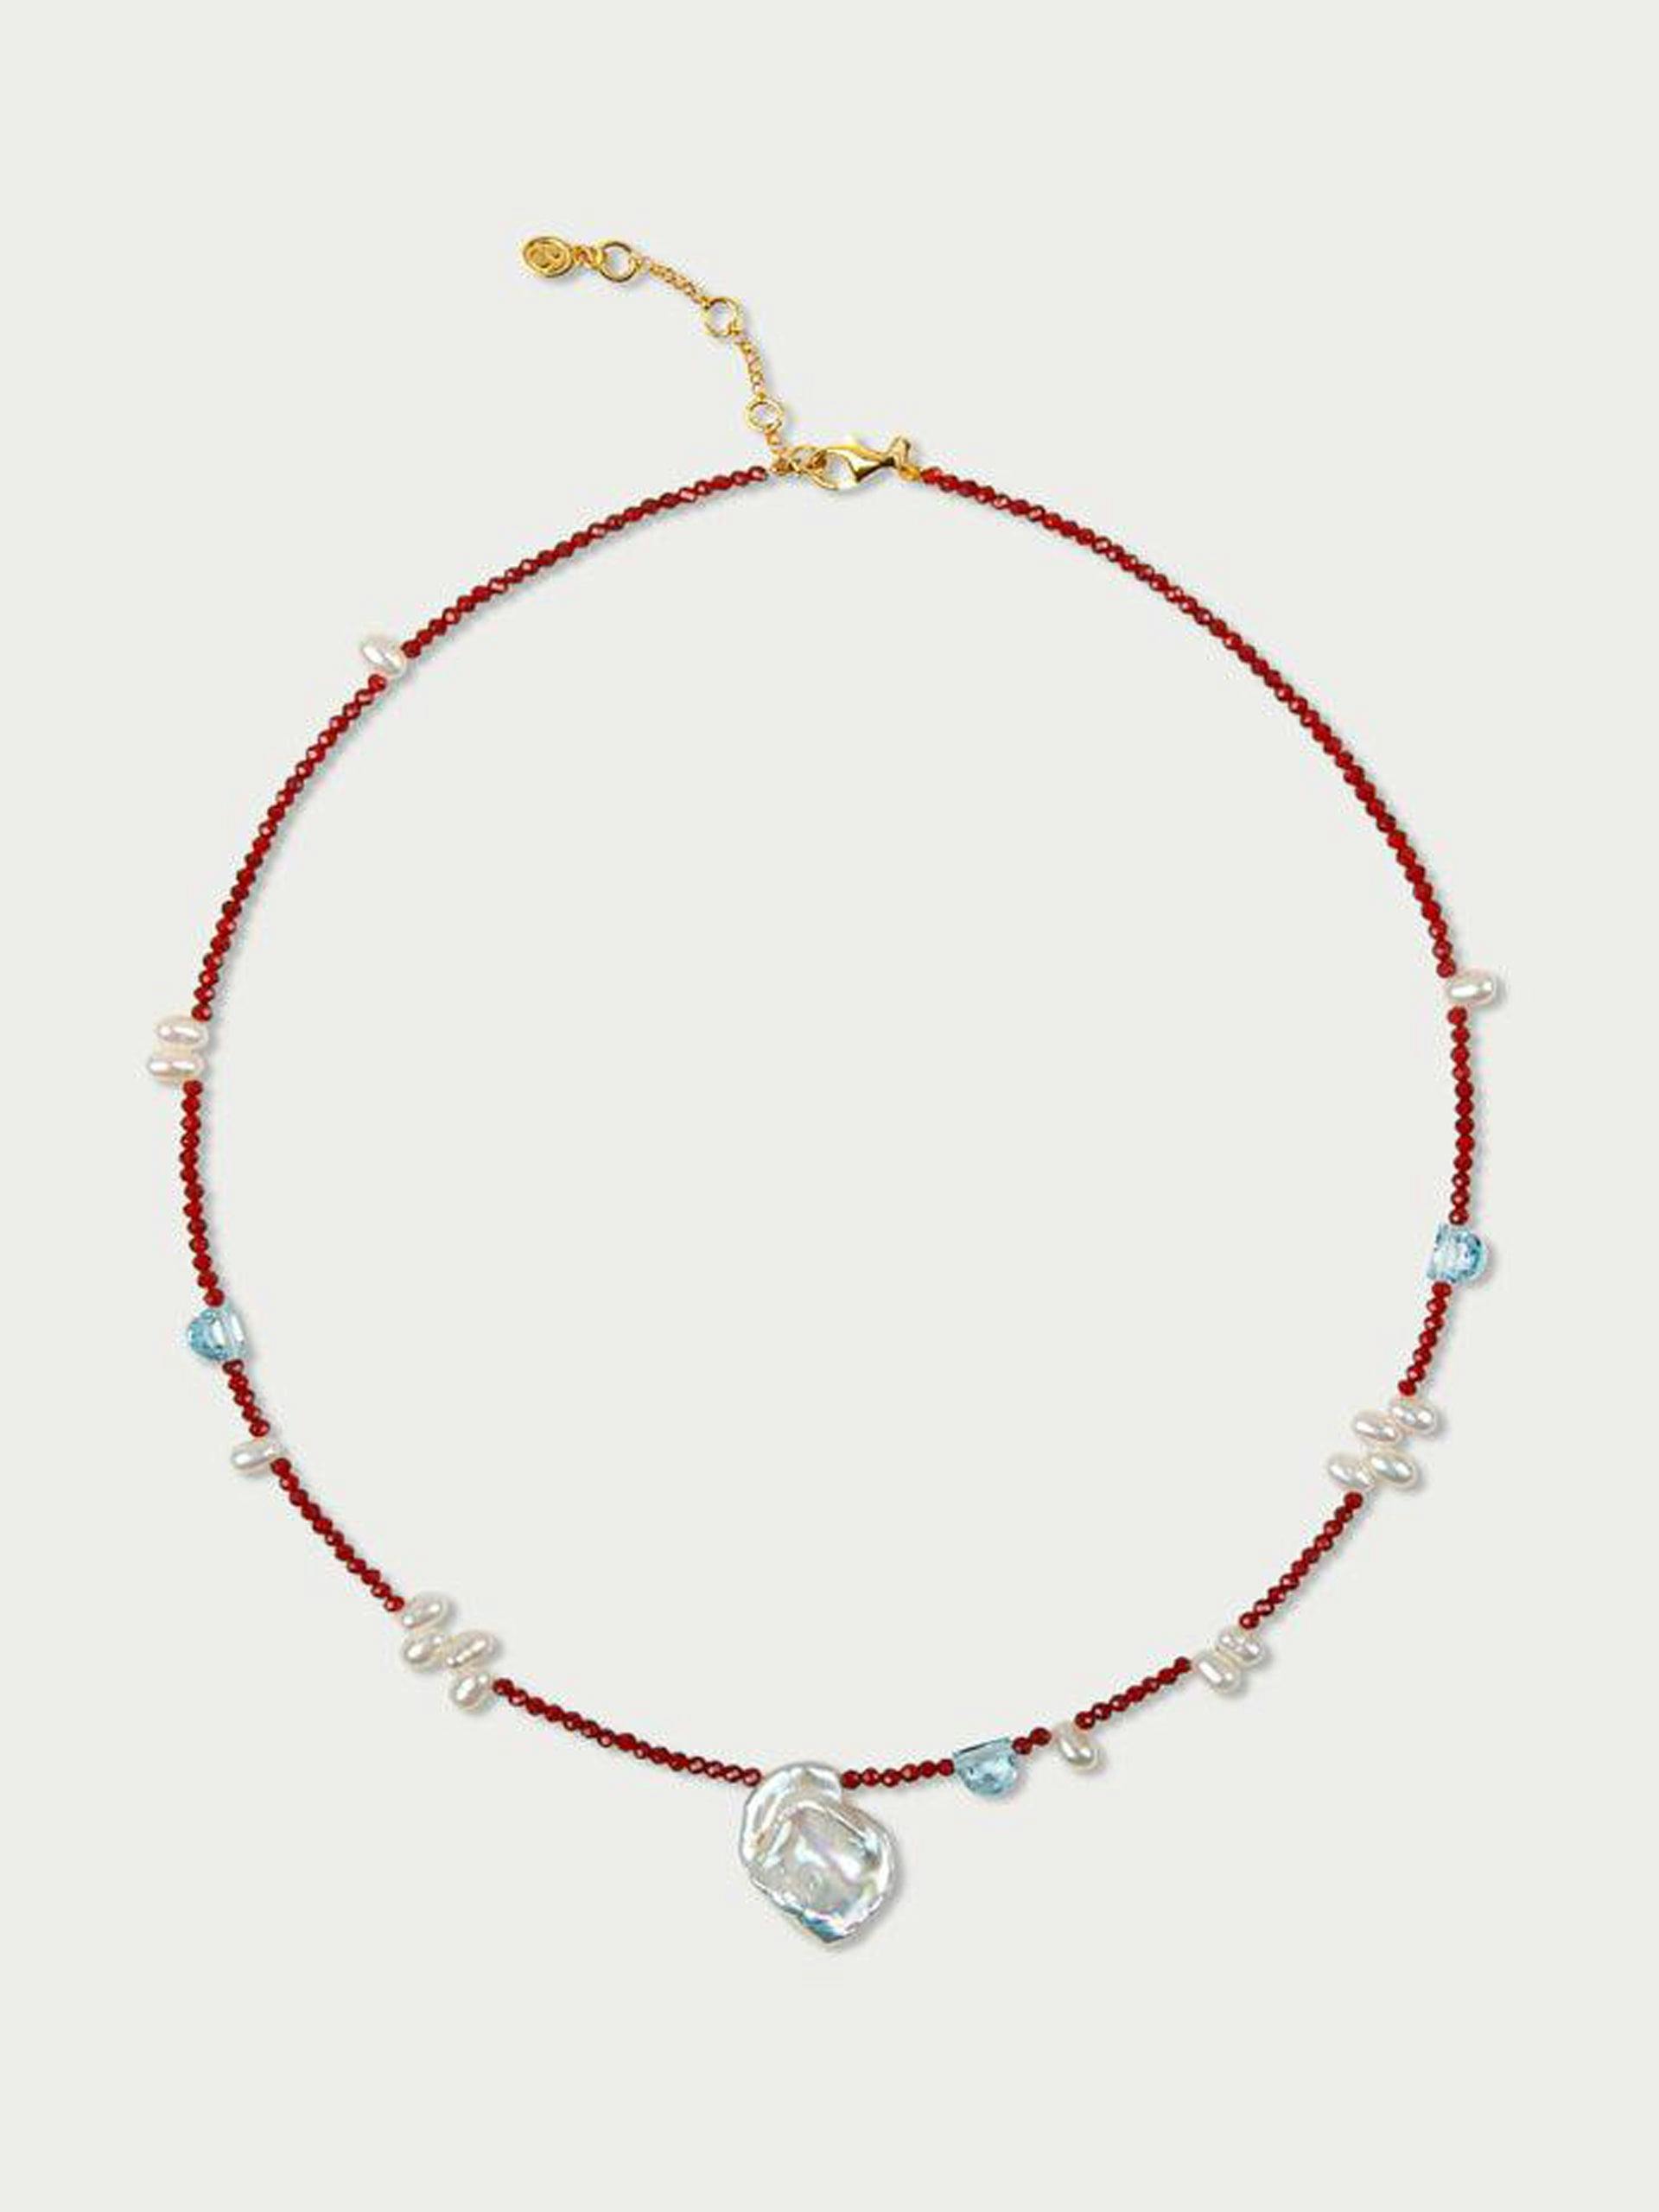 Lolipop red carnelian, blue topaz and pearl necklace